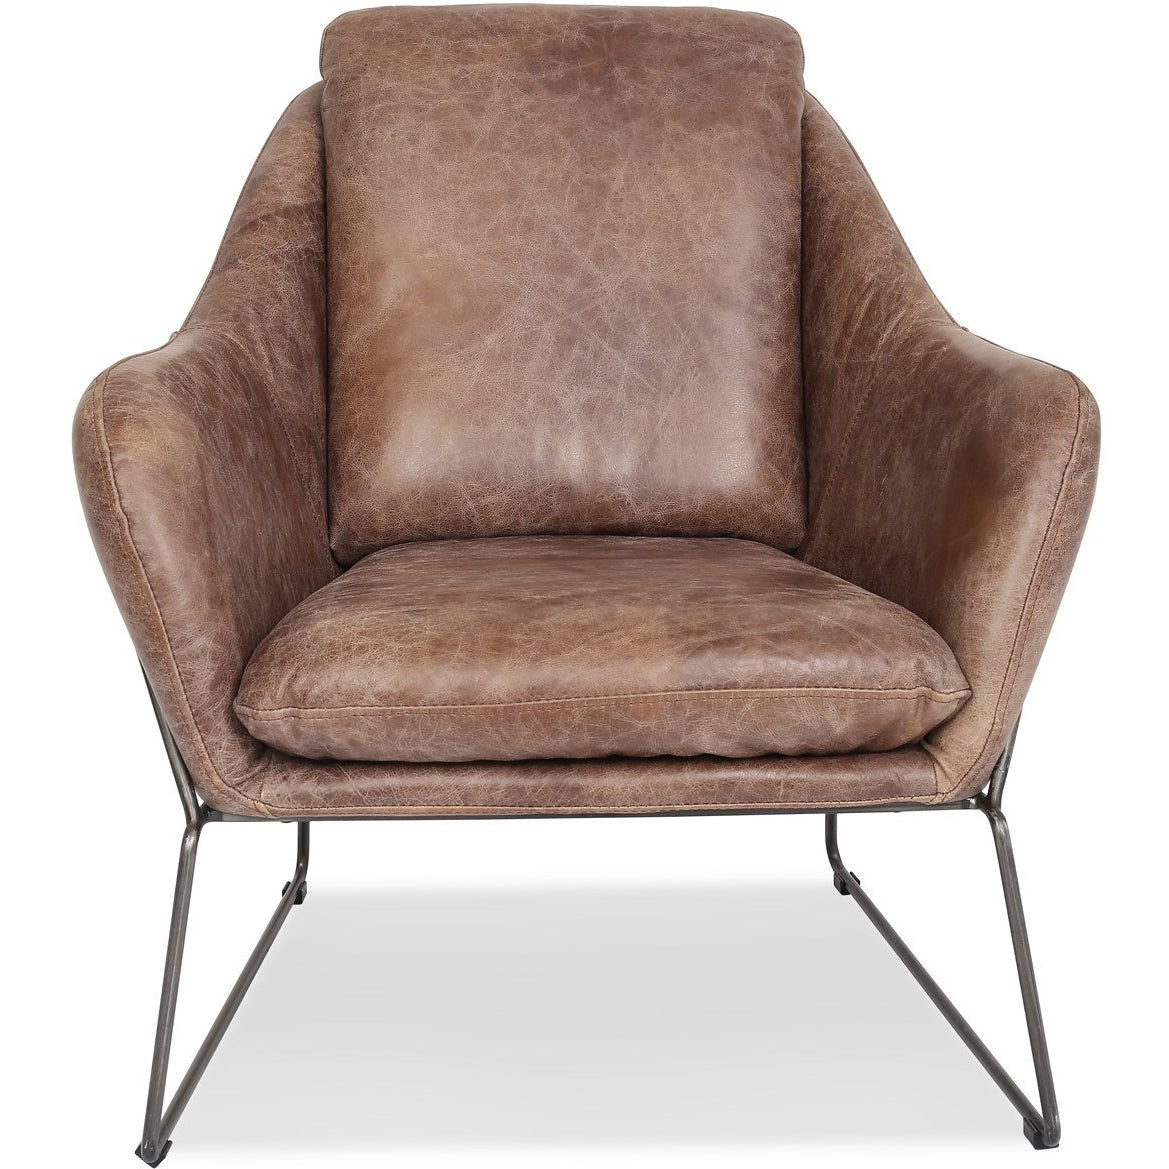 Edloe Finch Lionel Leather Accent Chair